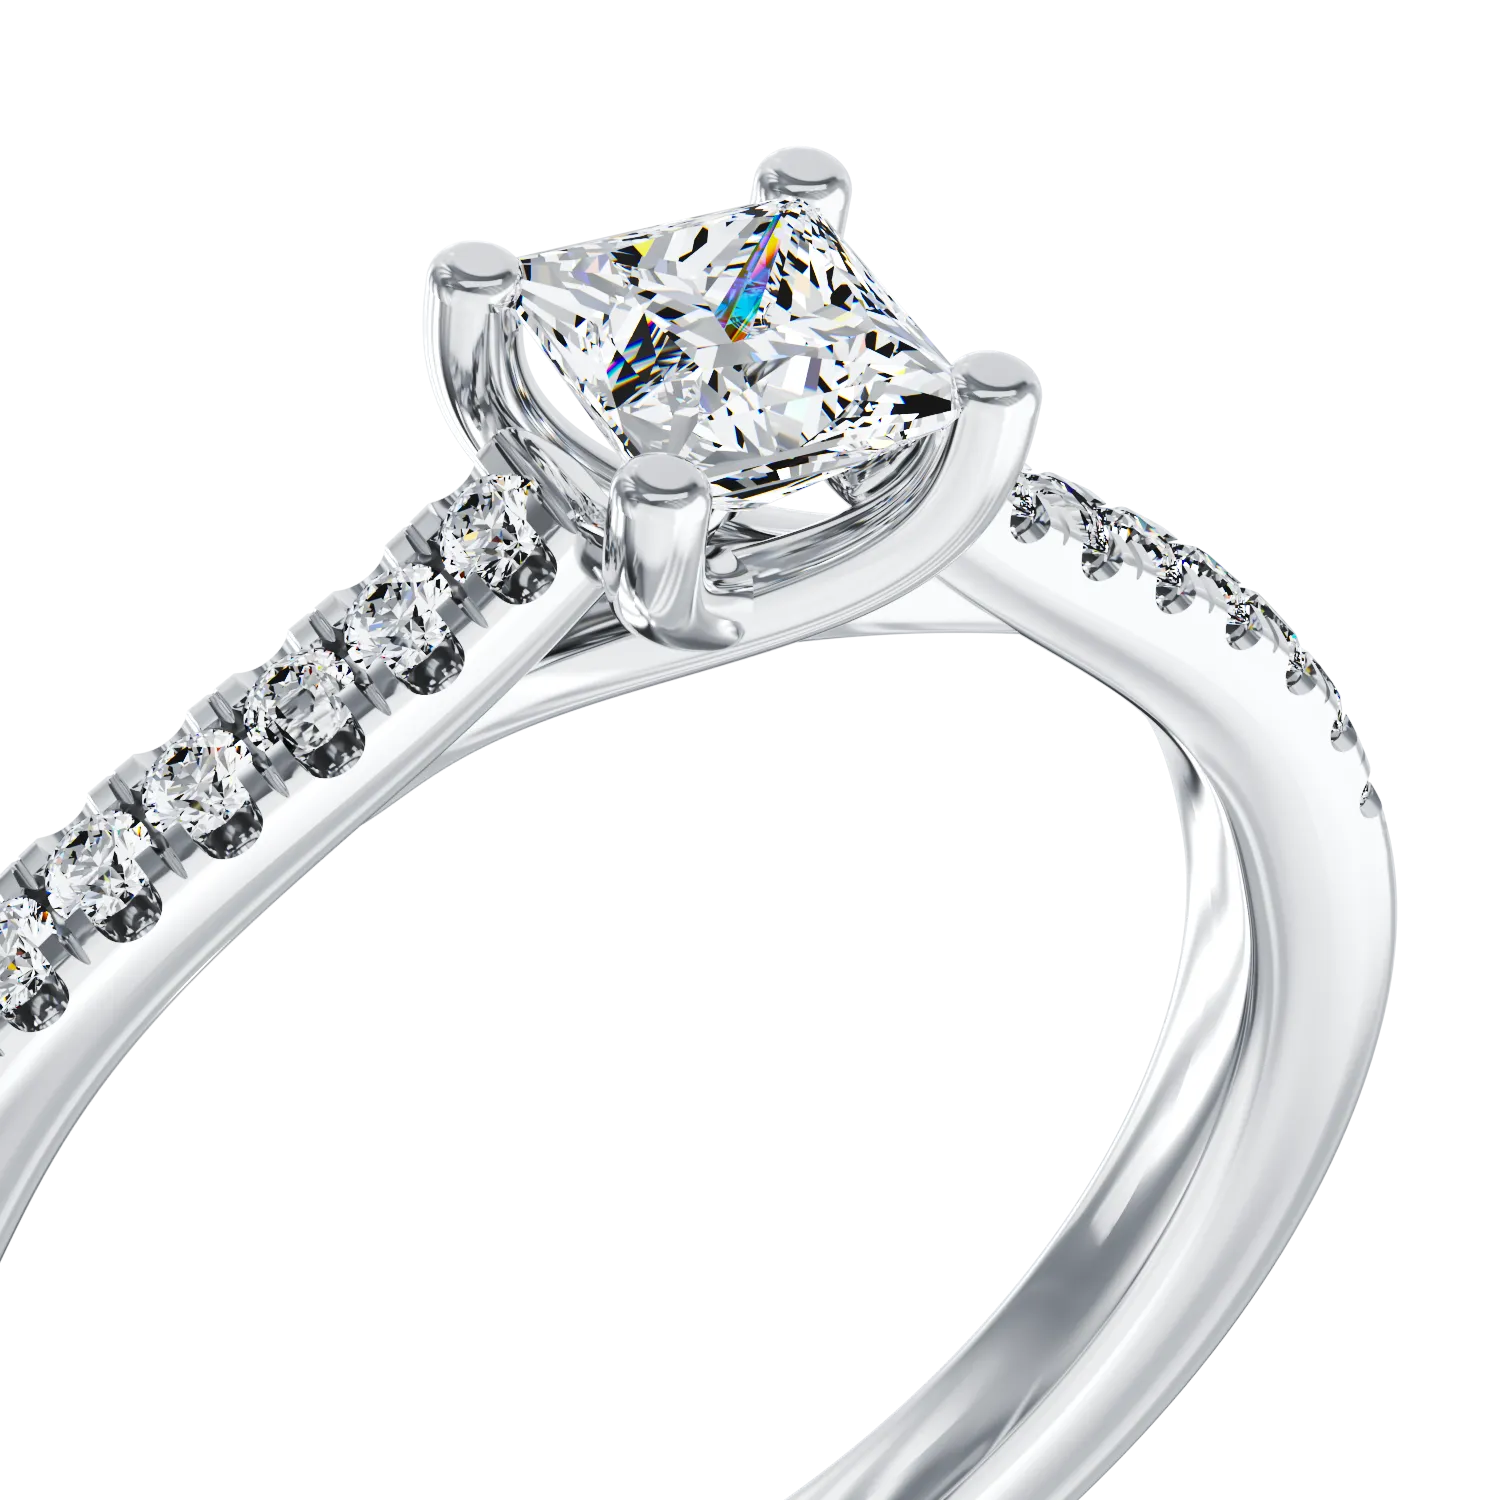 18K white gold engagement ring with 0.31ct diamond and 0.15ct diamonds